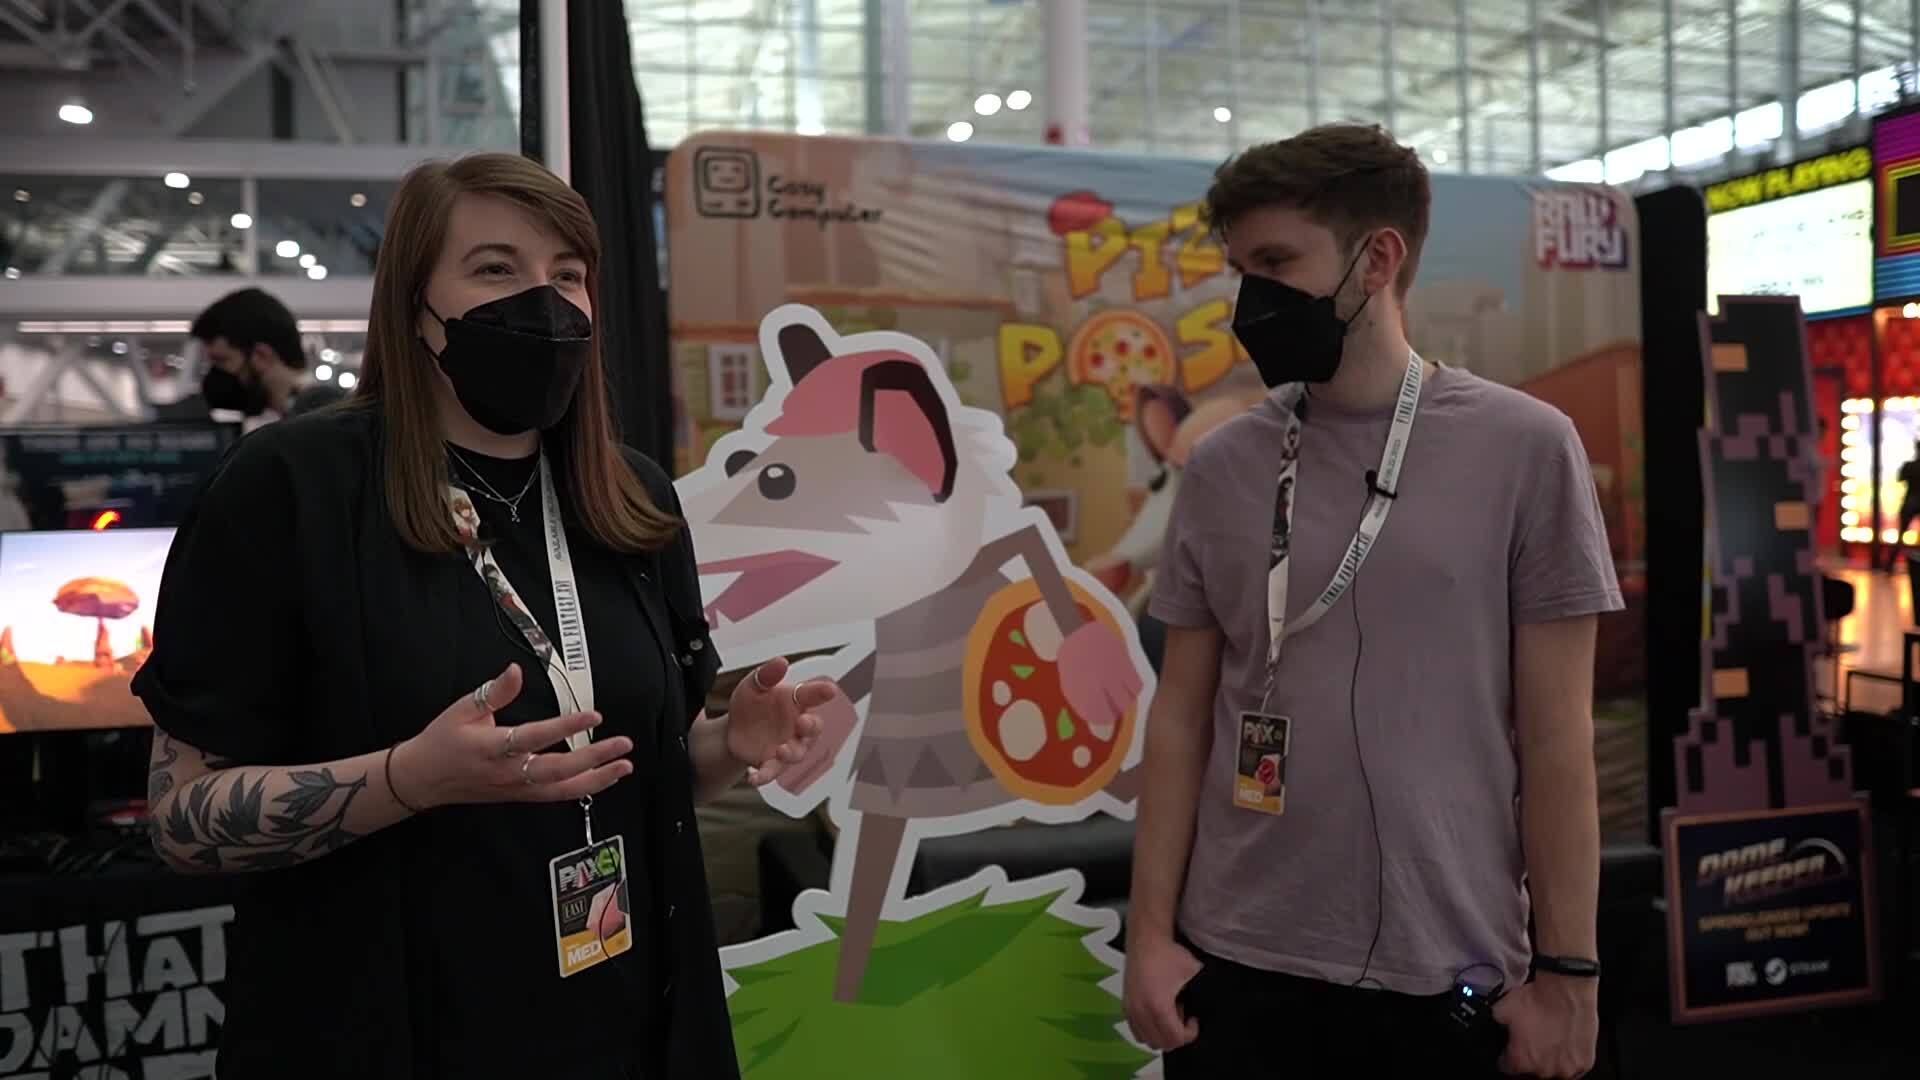 Liam and Rachel stand next to the Pizza Possum booth at PAX East